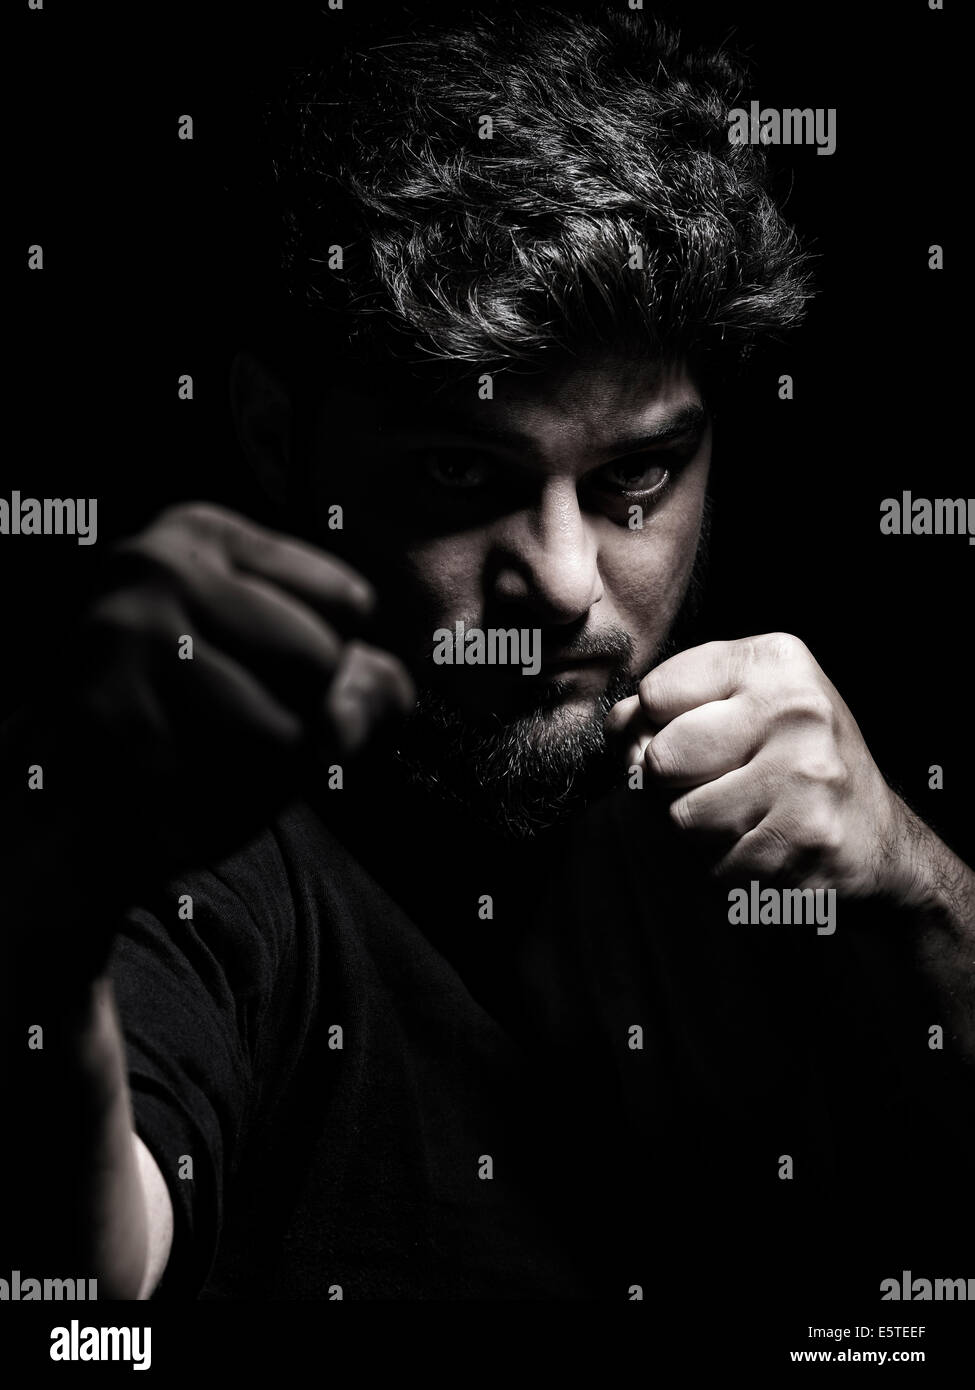 Dramatic portrait of a man in a fighting stance with fists in front of his face Stock Photo